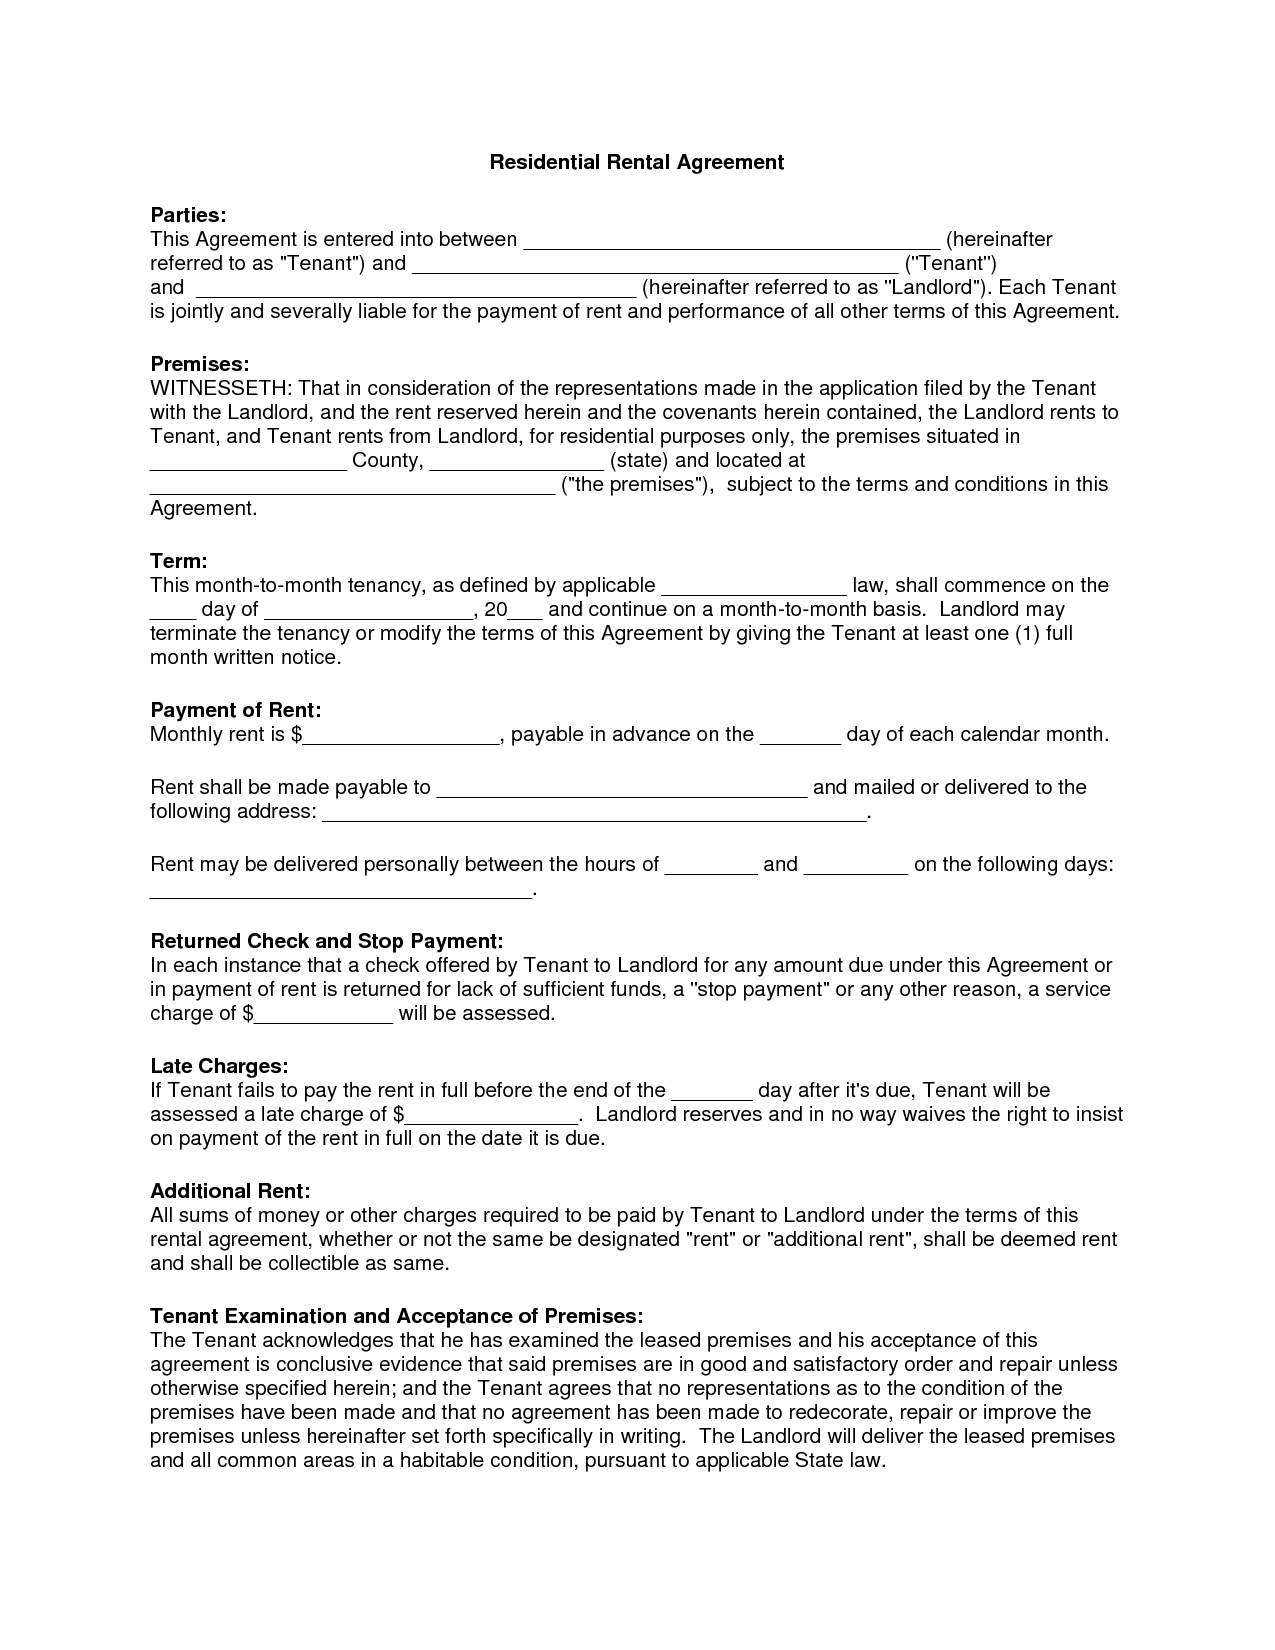 Free Copy Rental Lease Agreement | Residential Rental Agreement - Free Printable Residential Rental Agreement Forms